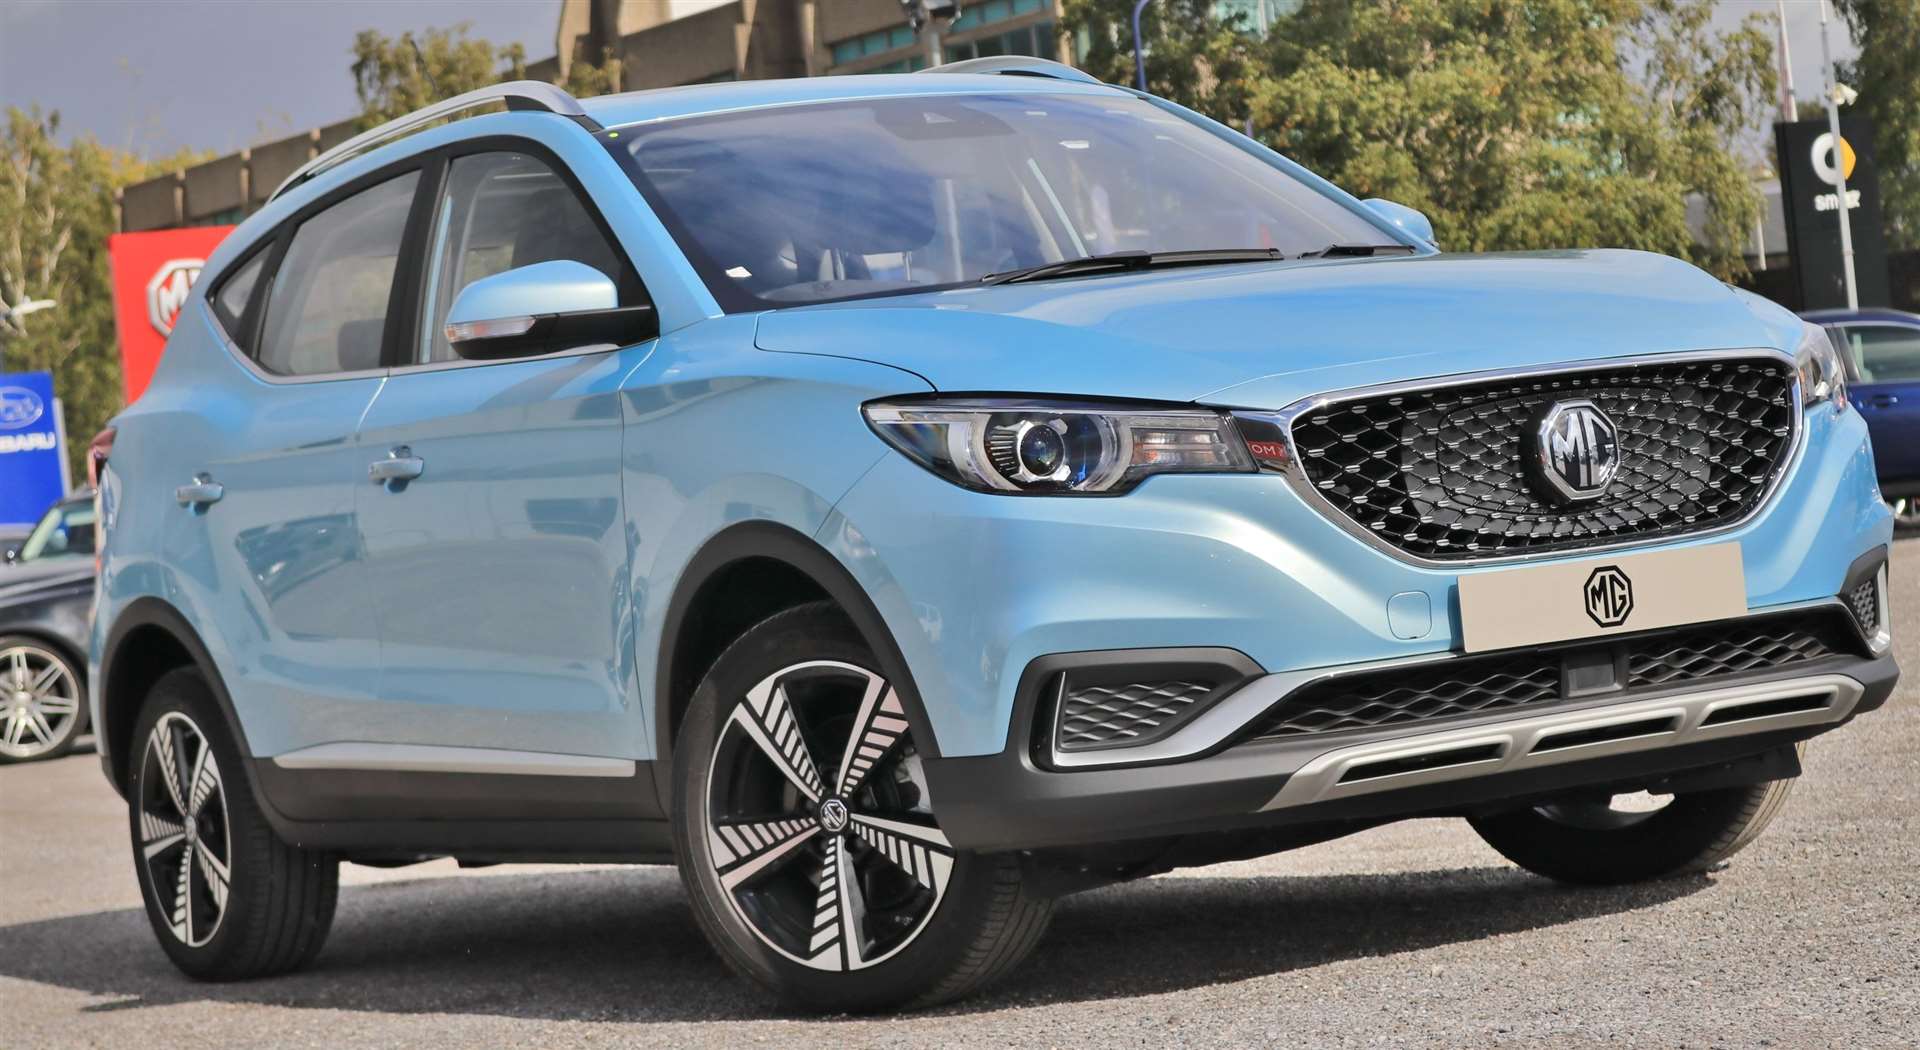 The MG ZS EV's sleek, bold design looks right at home on smart city streets or off the beaten track.